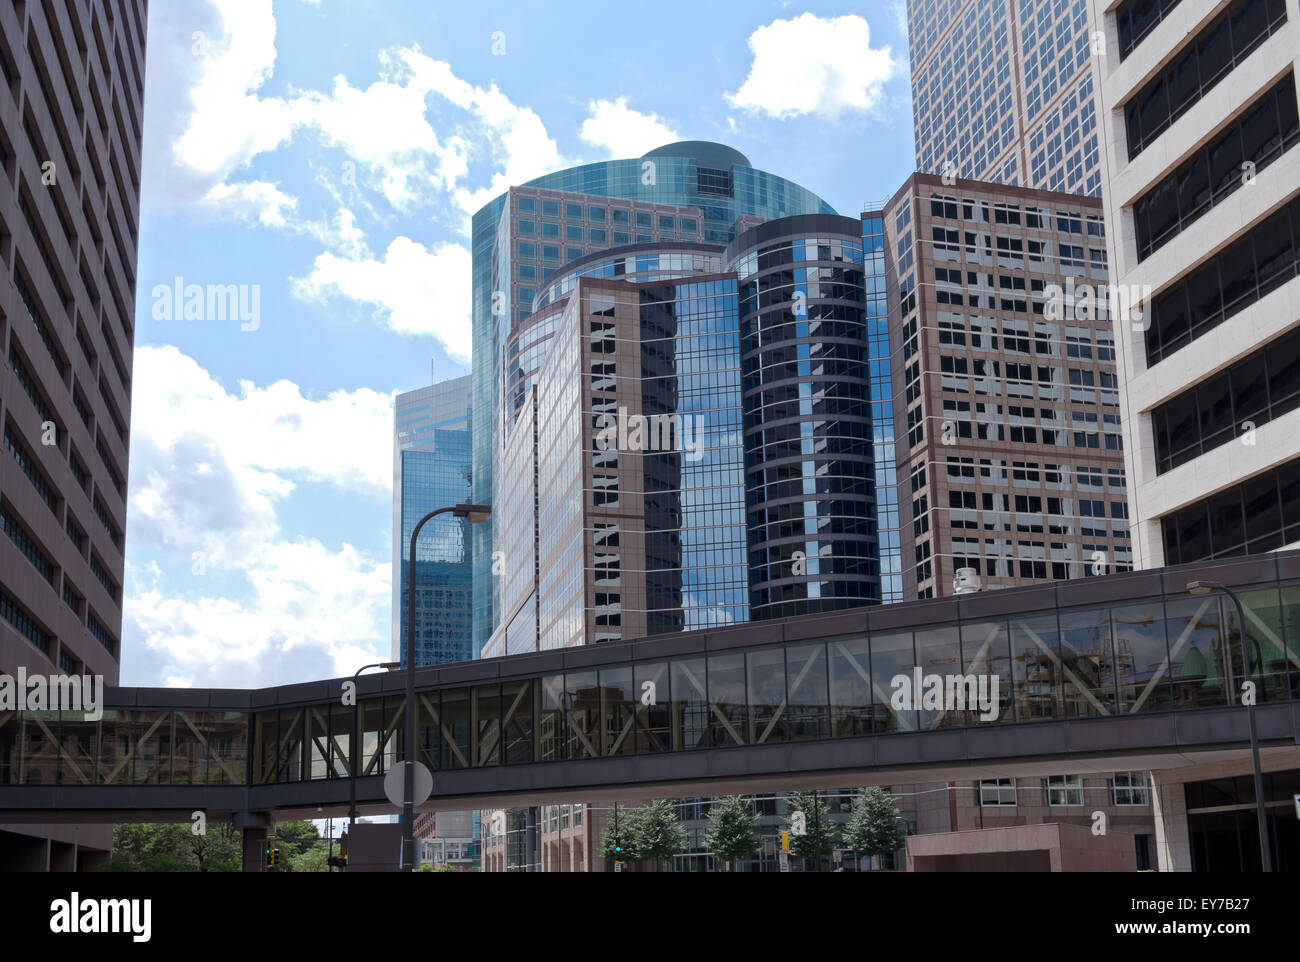 cityscape of modern architecture glass skyscrapers towers high-rises and skyway in minneapolis minnesota Stock Photo